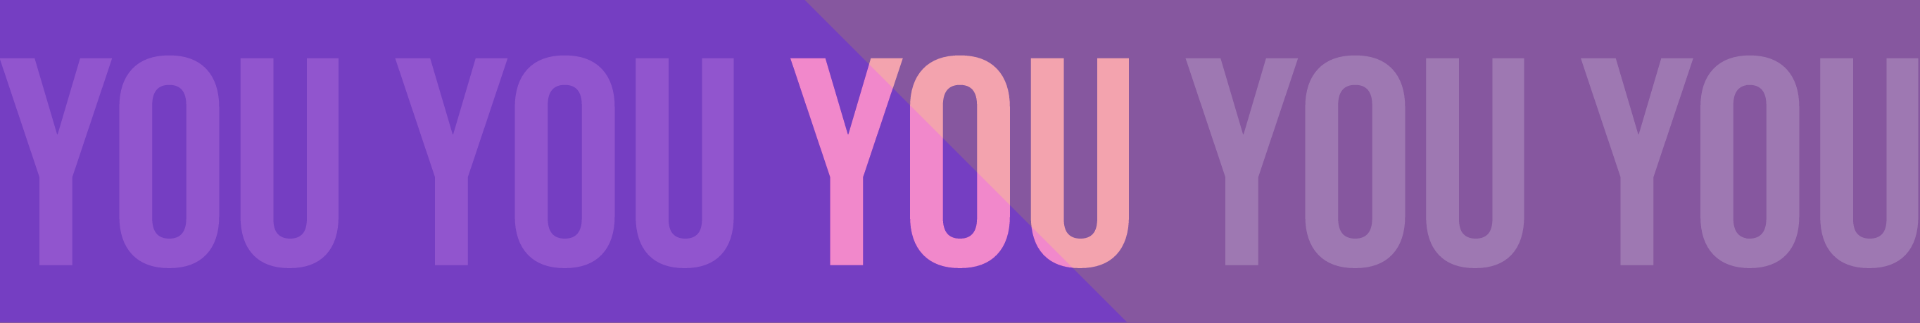 You banner repeating the word YOU on a purple background